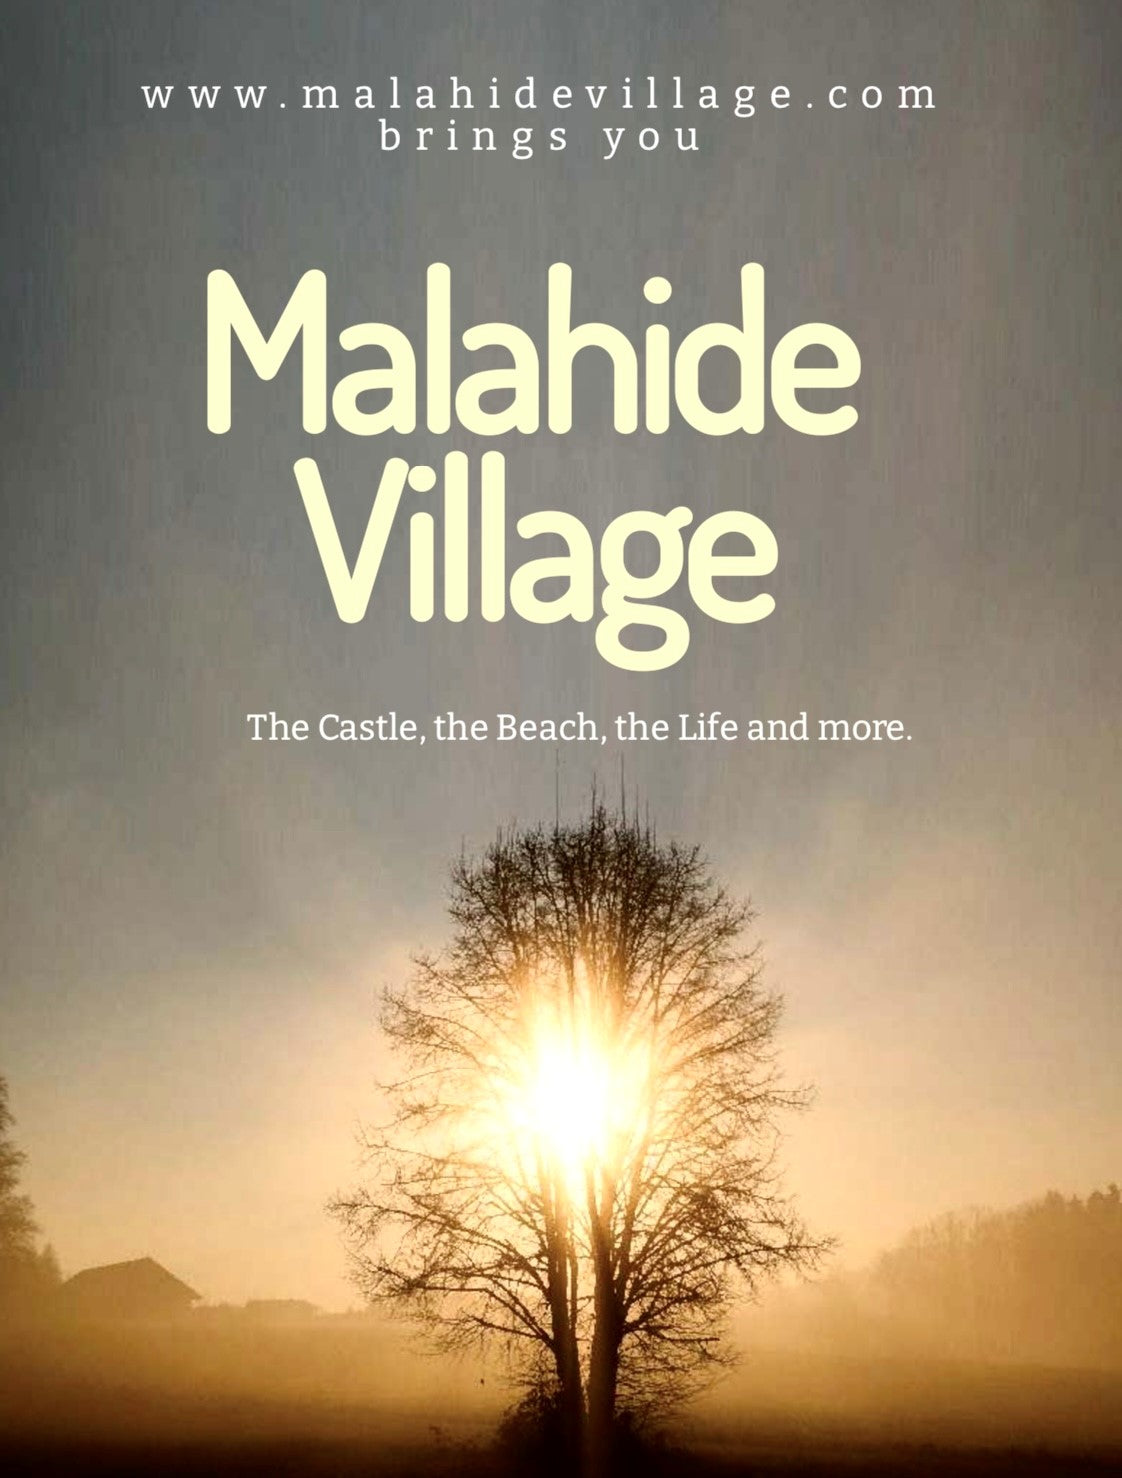 FREE e-book. Malahide & Other Nearby Touristy Attractions. It saves you explaining everything !